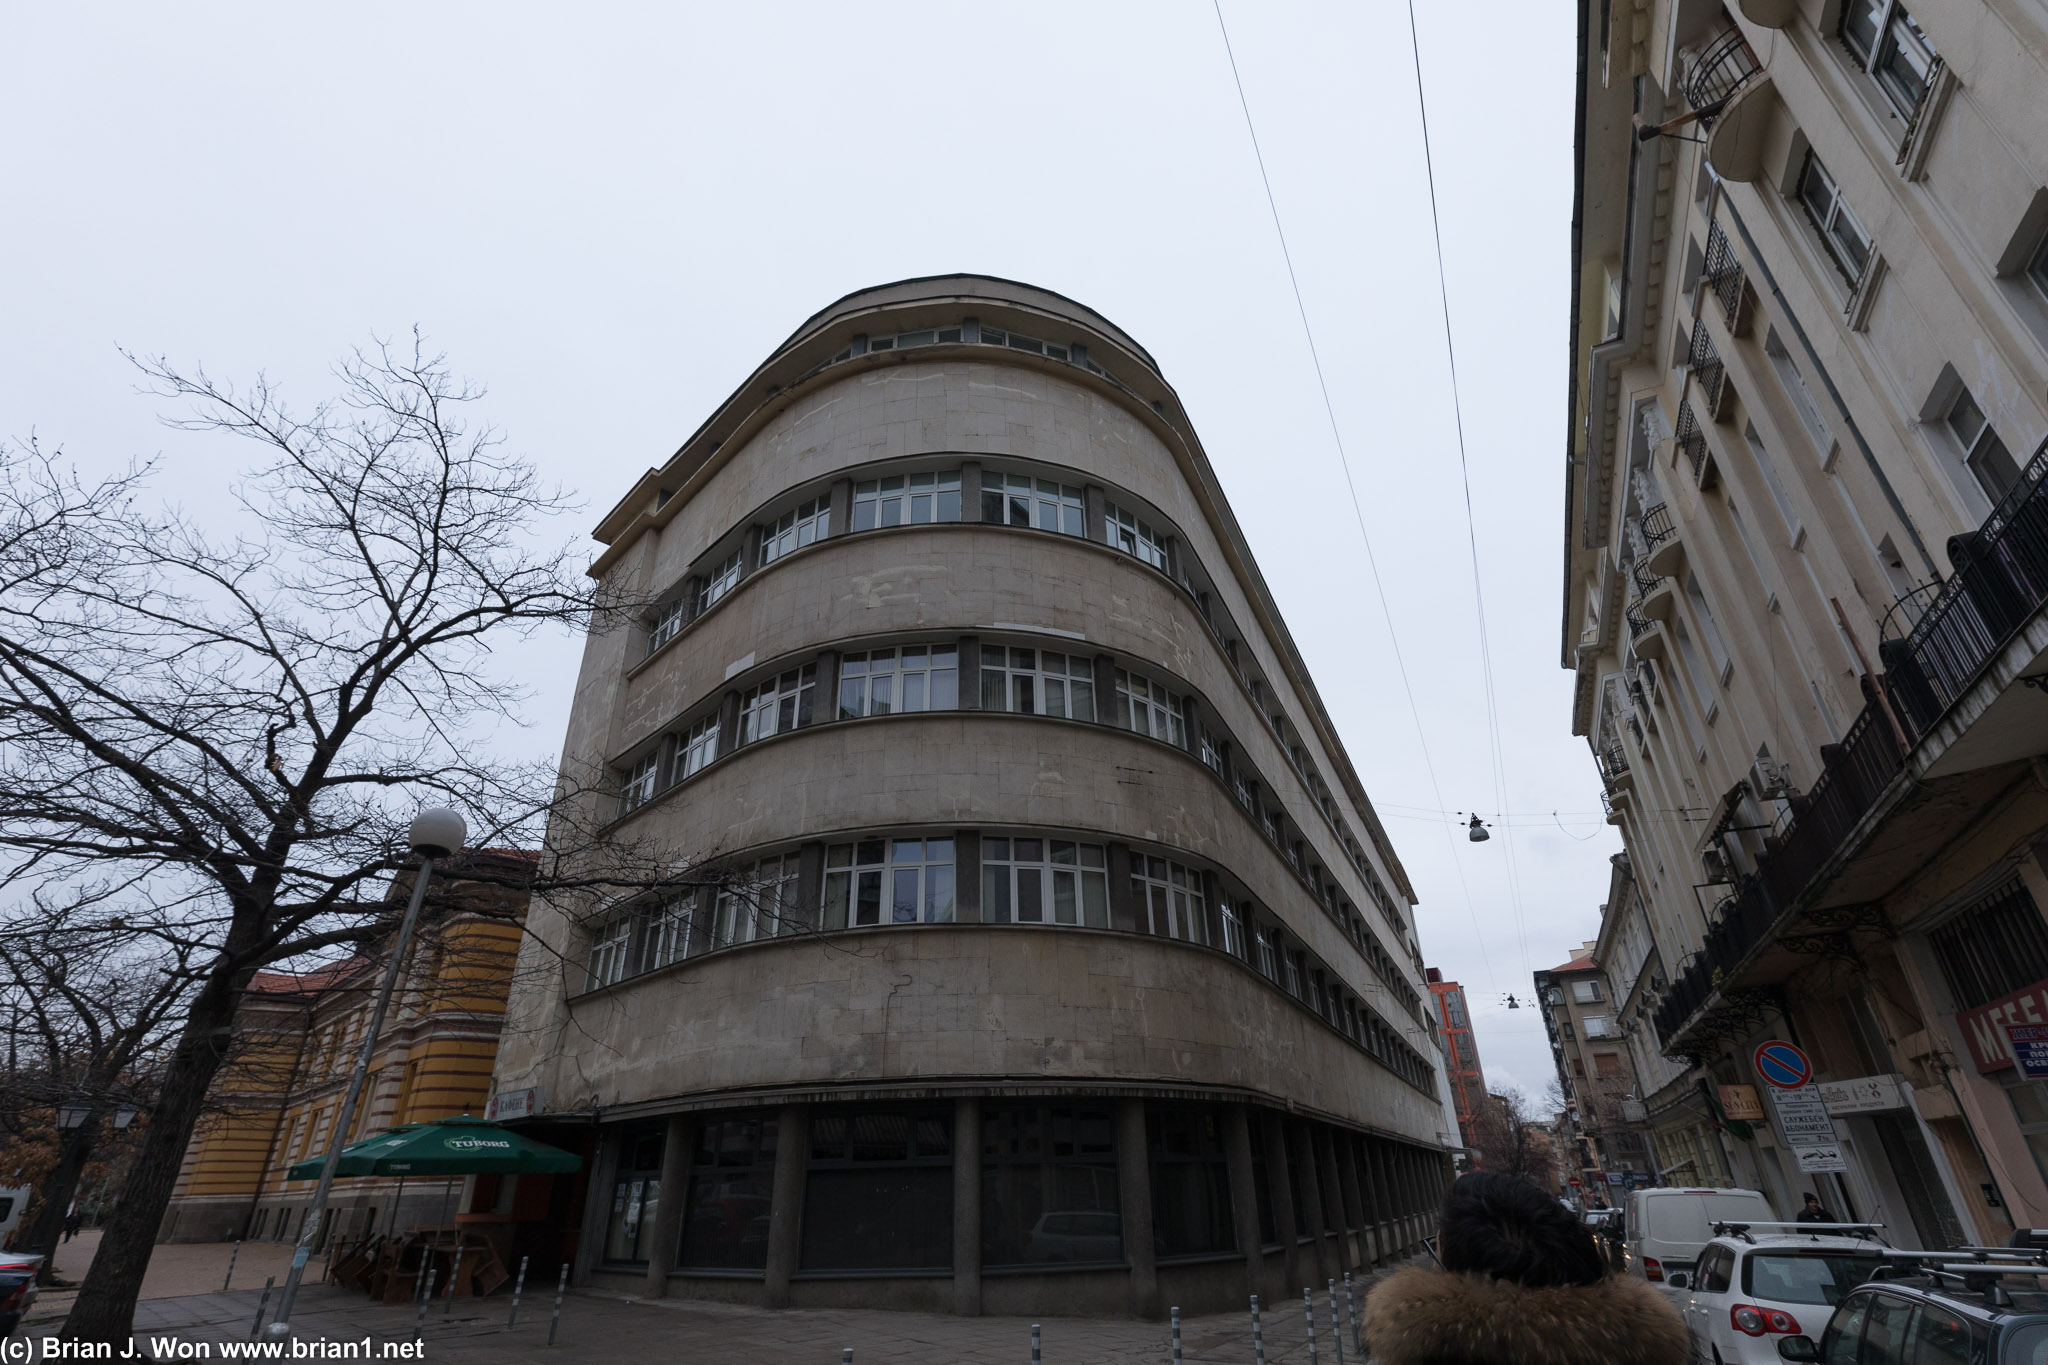 Slightly more character than expected from former Soviet bloc neighborhoods.